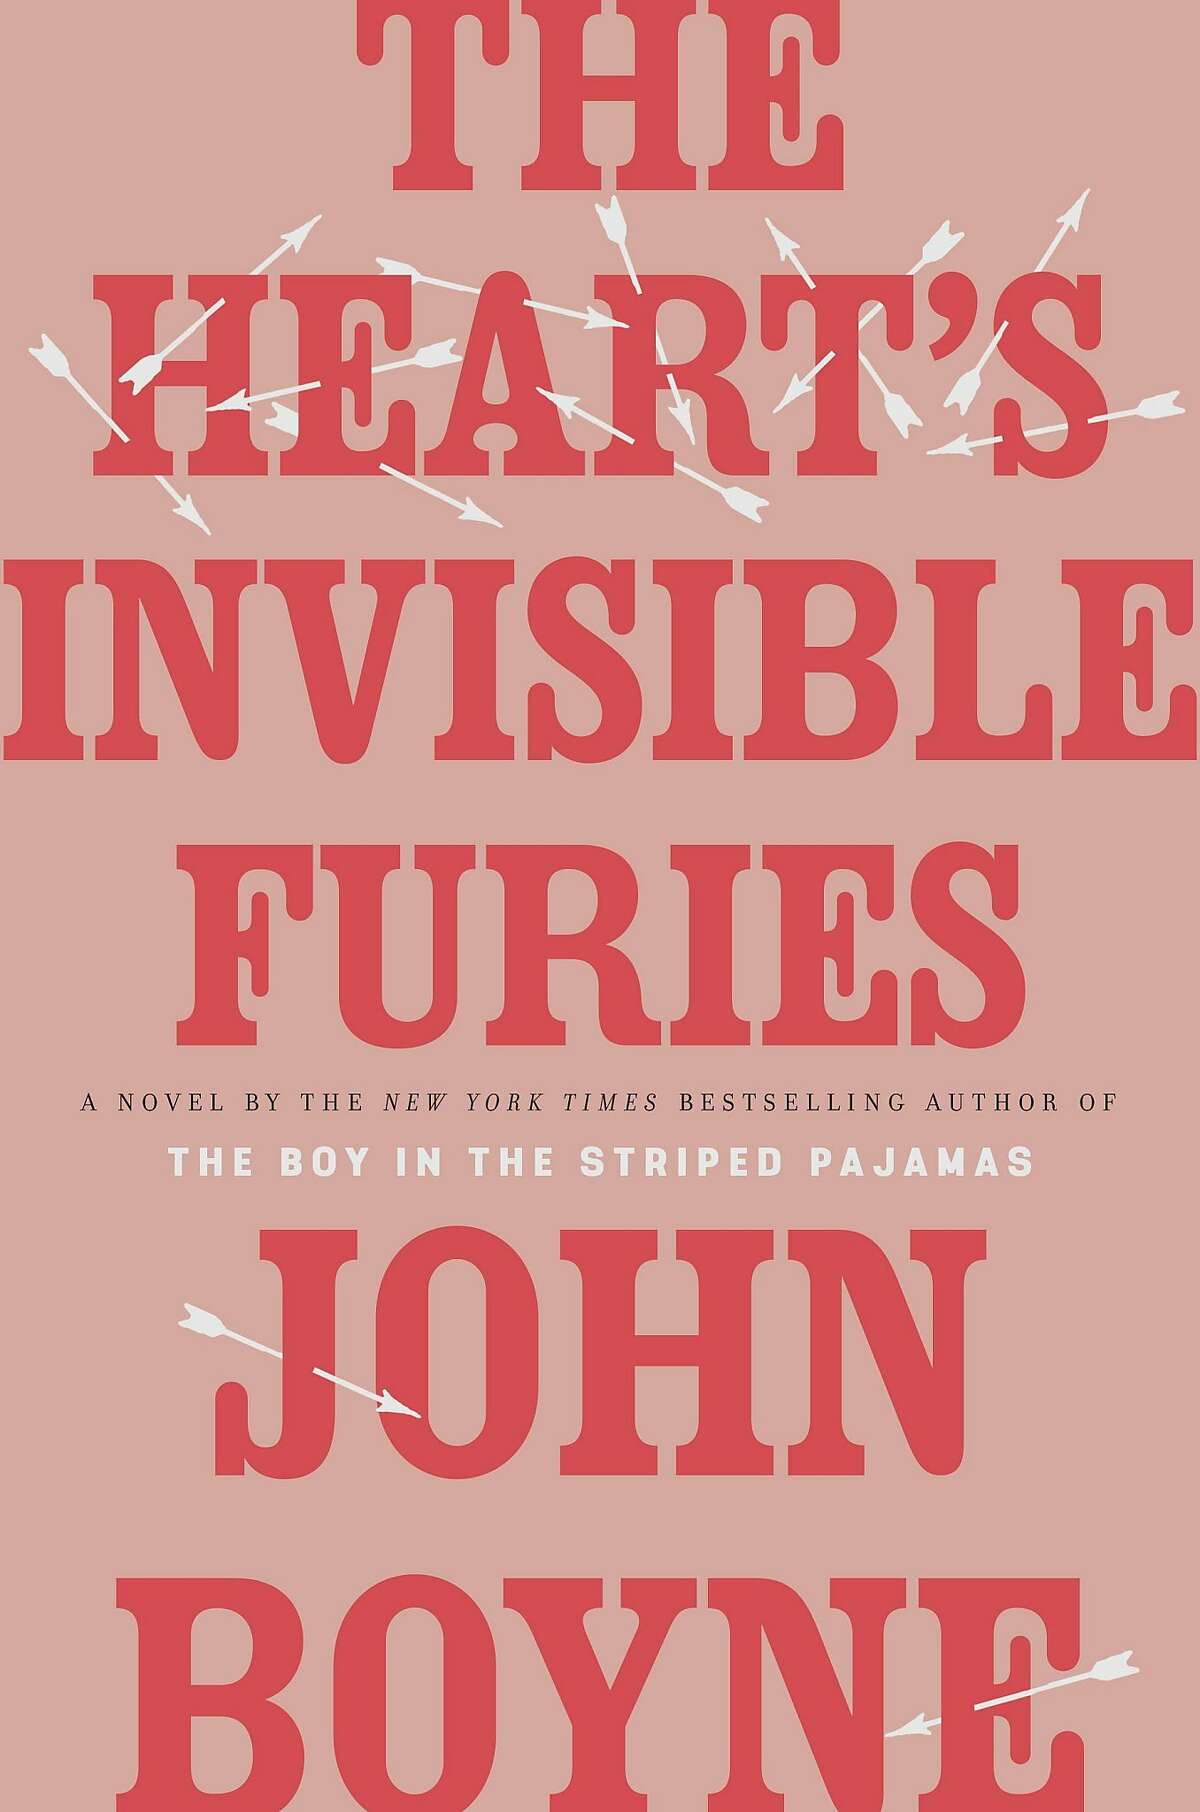 "The Heart's Invisible Furies"